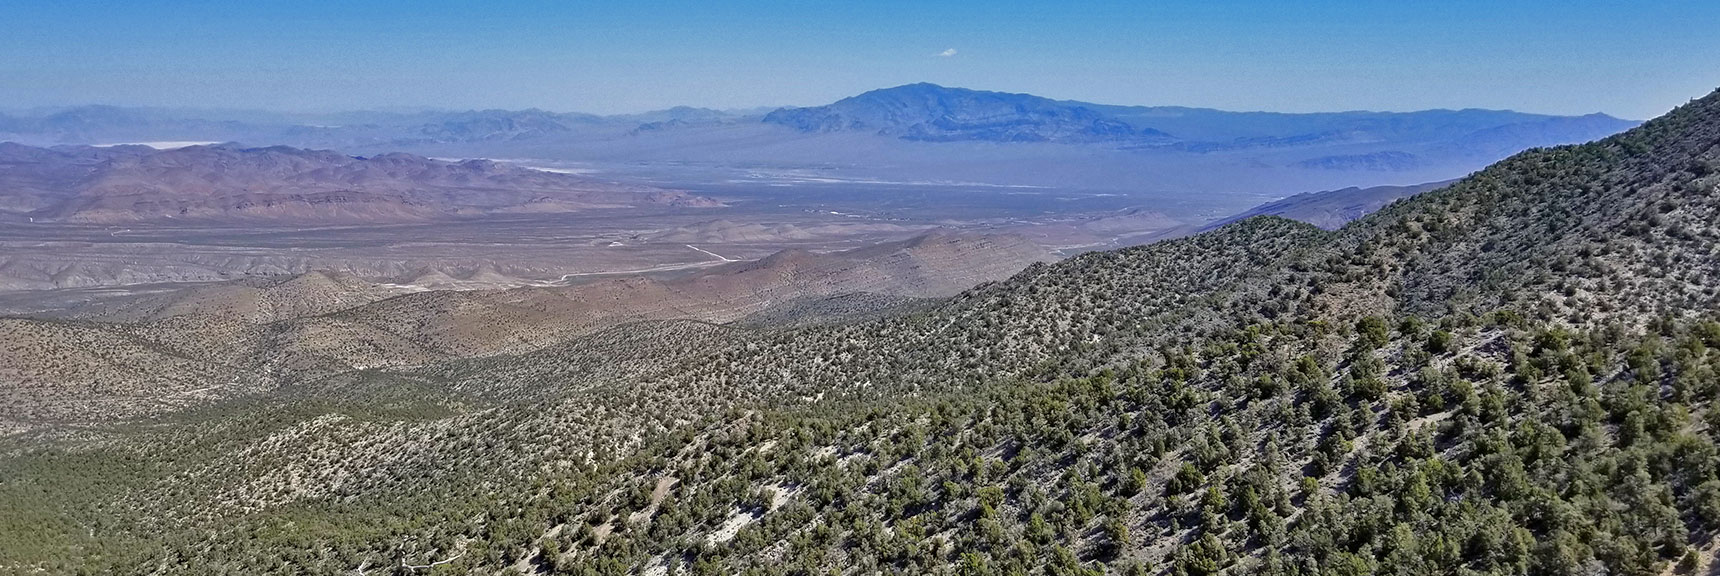 Sheep Range from Just West of El Padre Mountain, La Madre Mountains Wilderness, Nevada